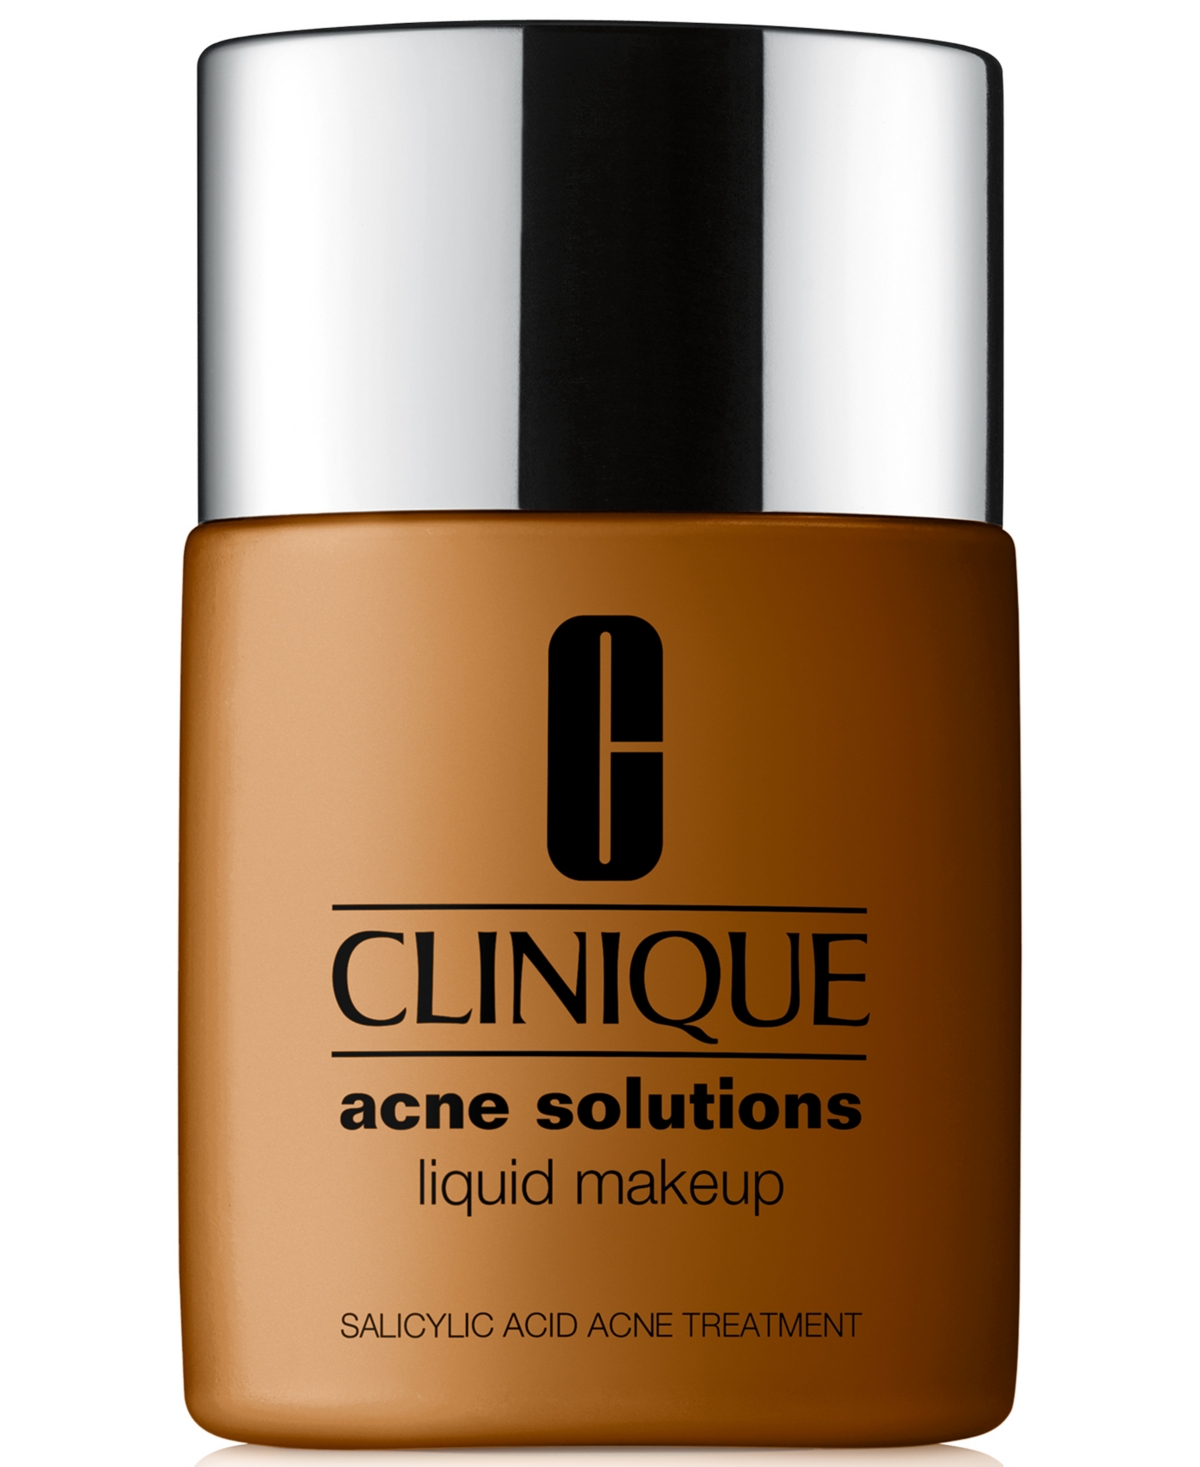 Clinique Acne Solutions Liquid Makeup Foundation, 1 Oz. In Amber